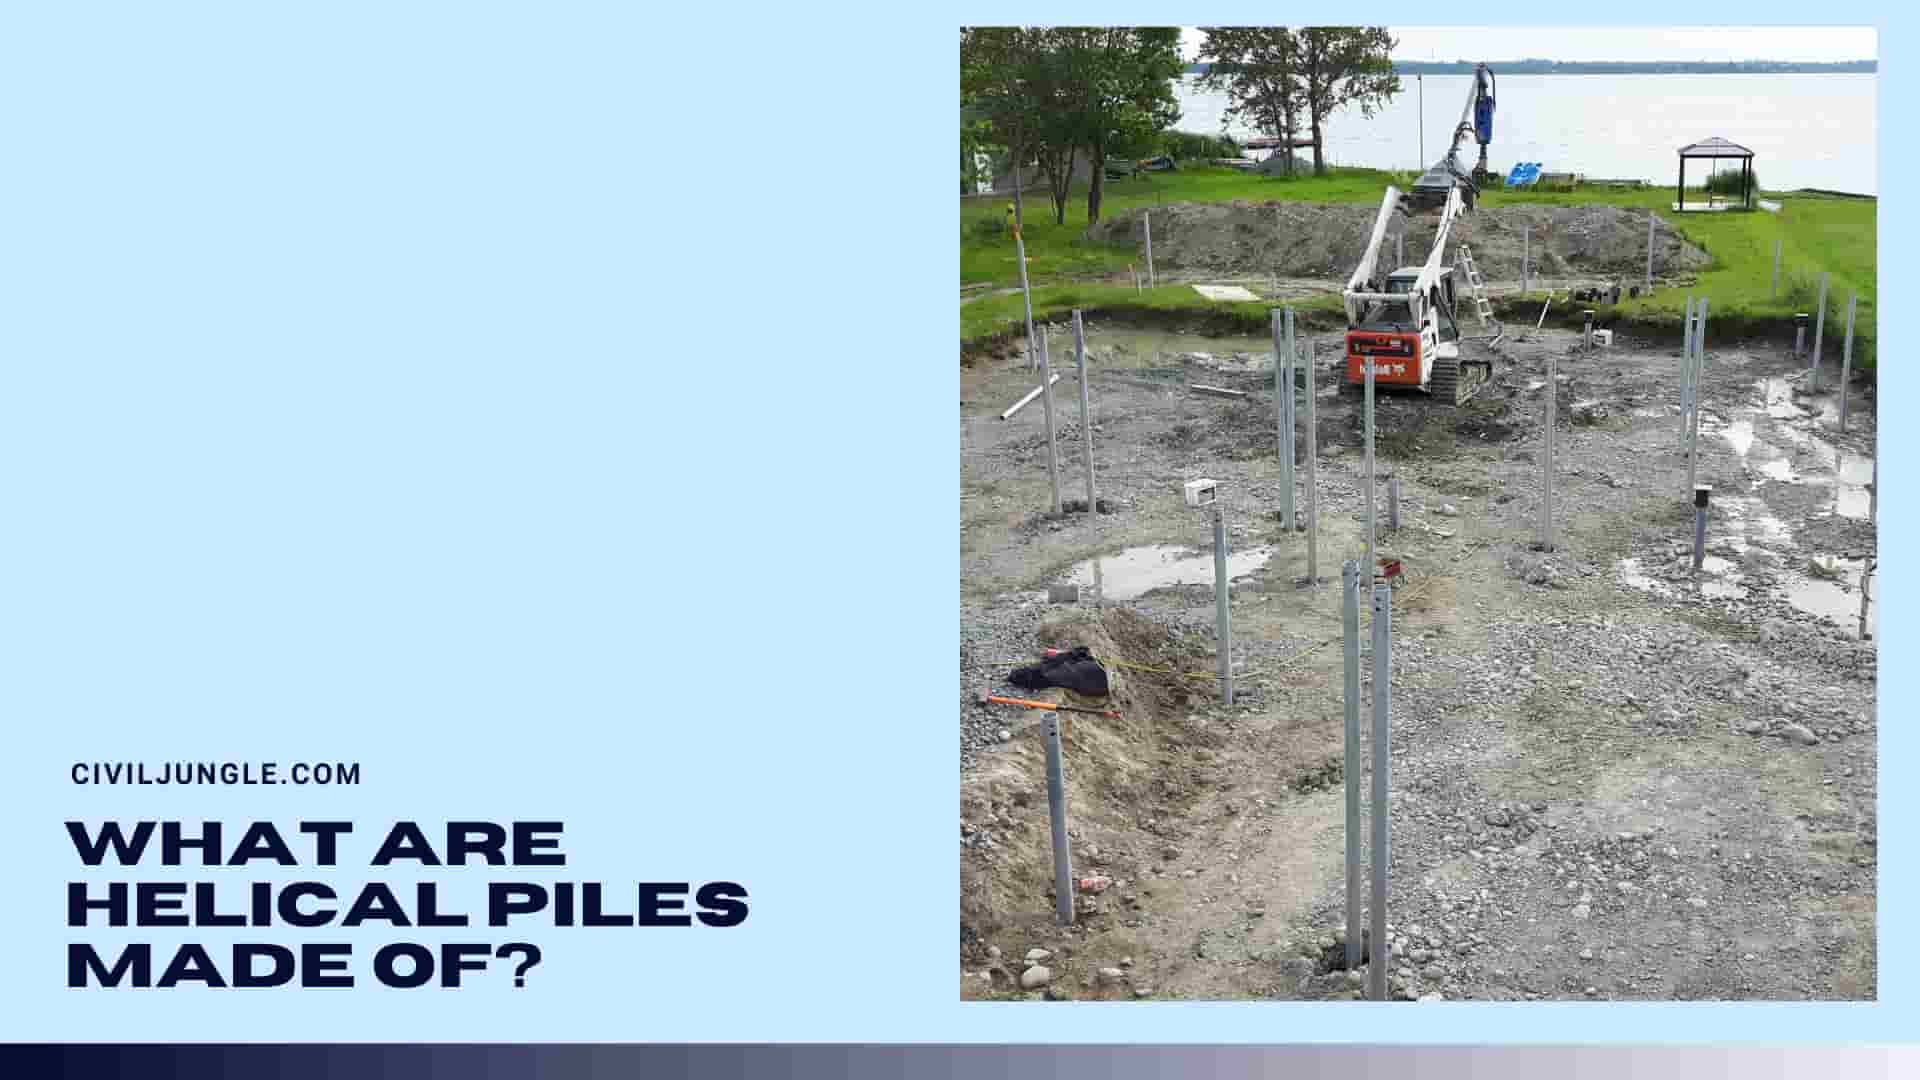 What Are Helical Piles Made of?